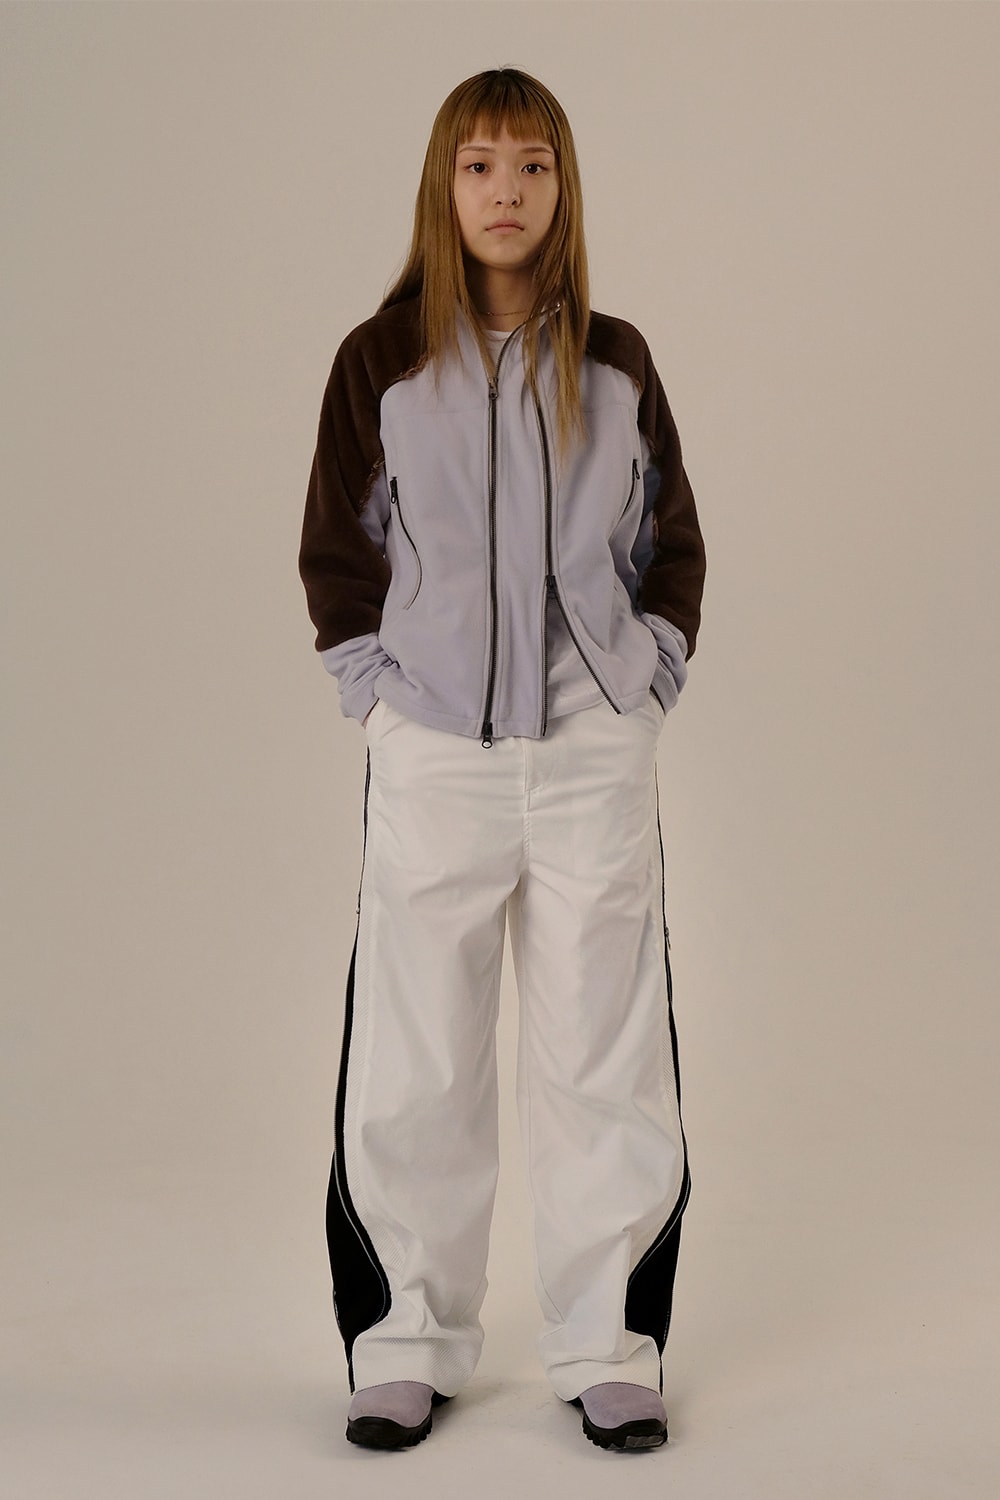 JICHOI Fall Winter 2020 Great Day Collection Lookbook Release info Buy Price Seoul South Korean Fashion Jihyung Choi